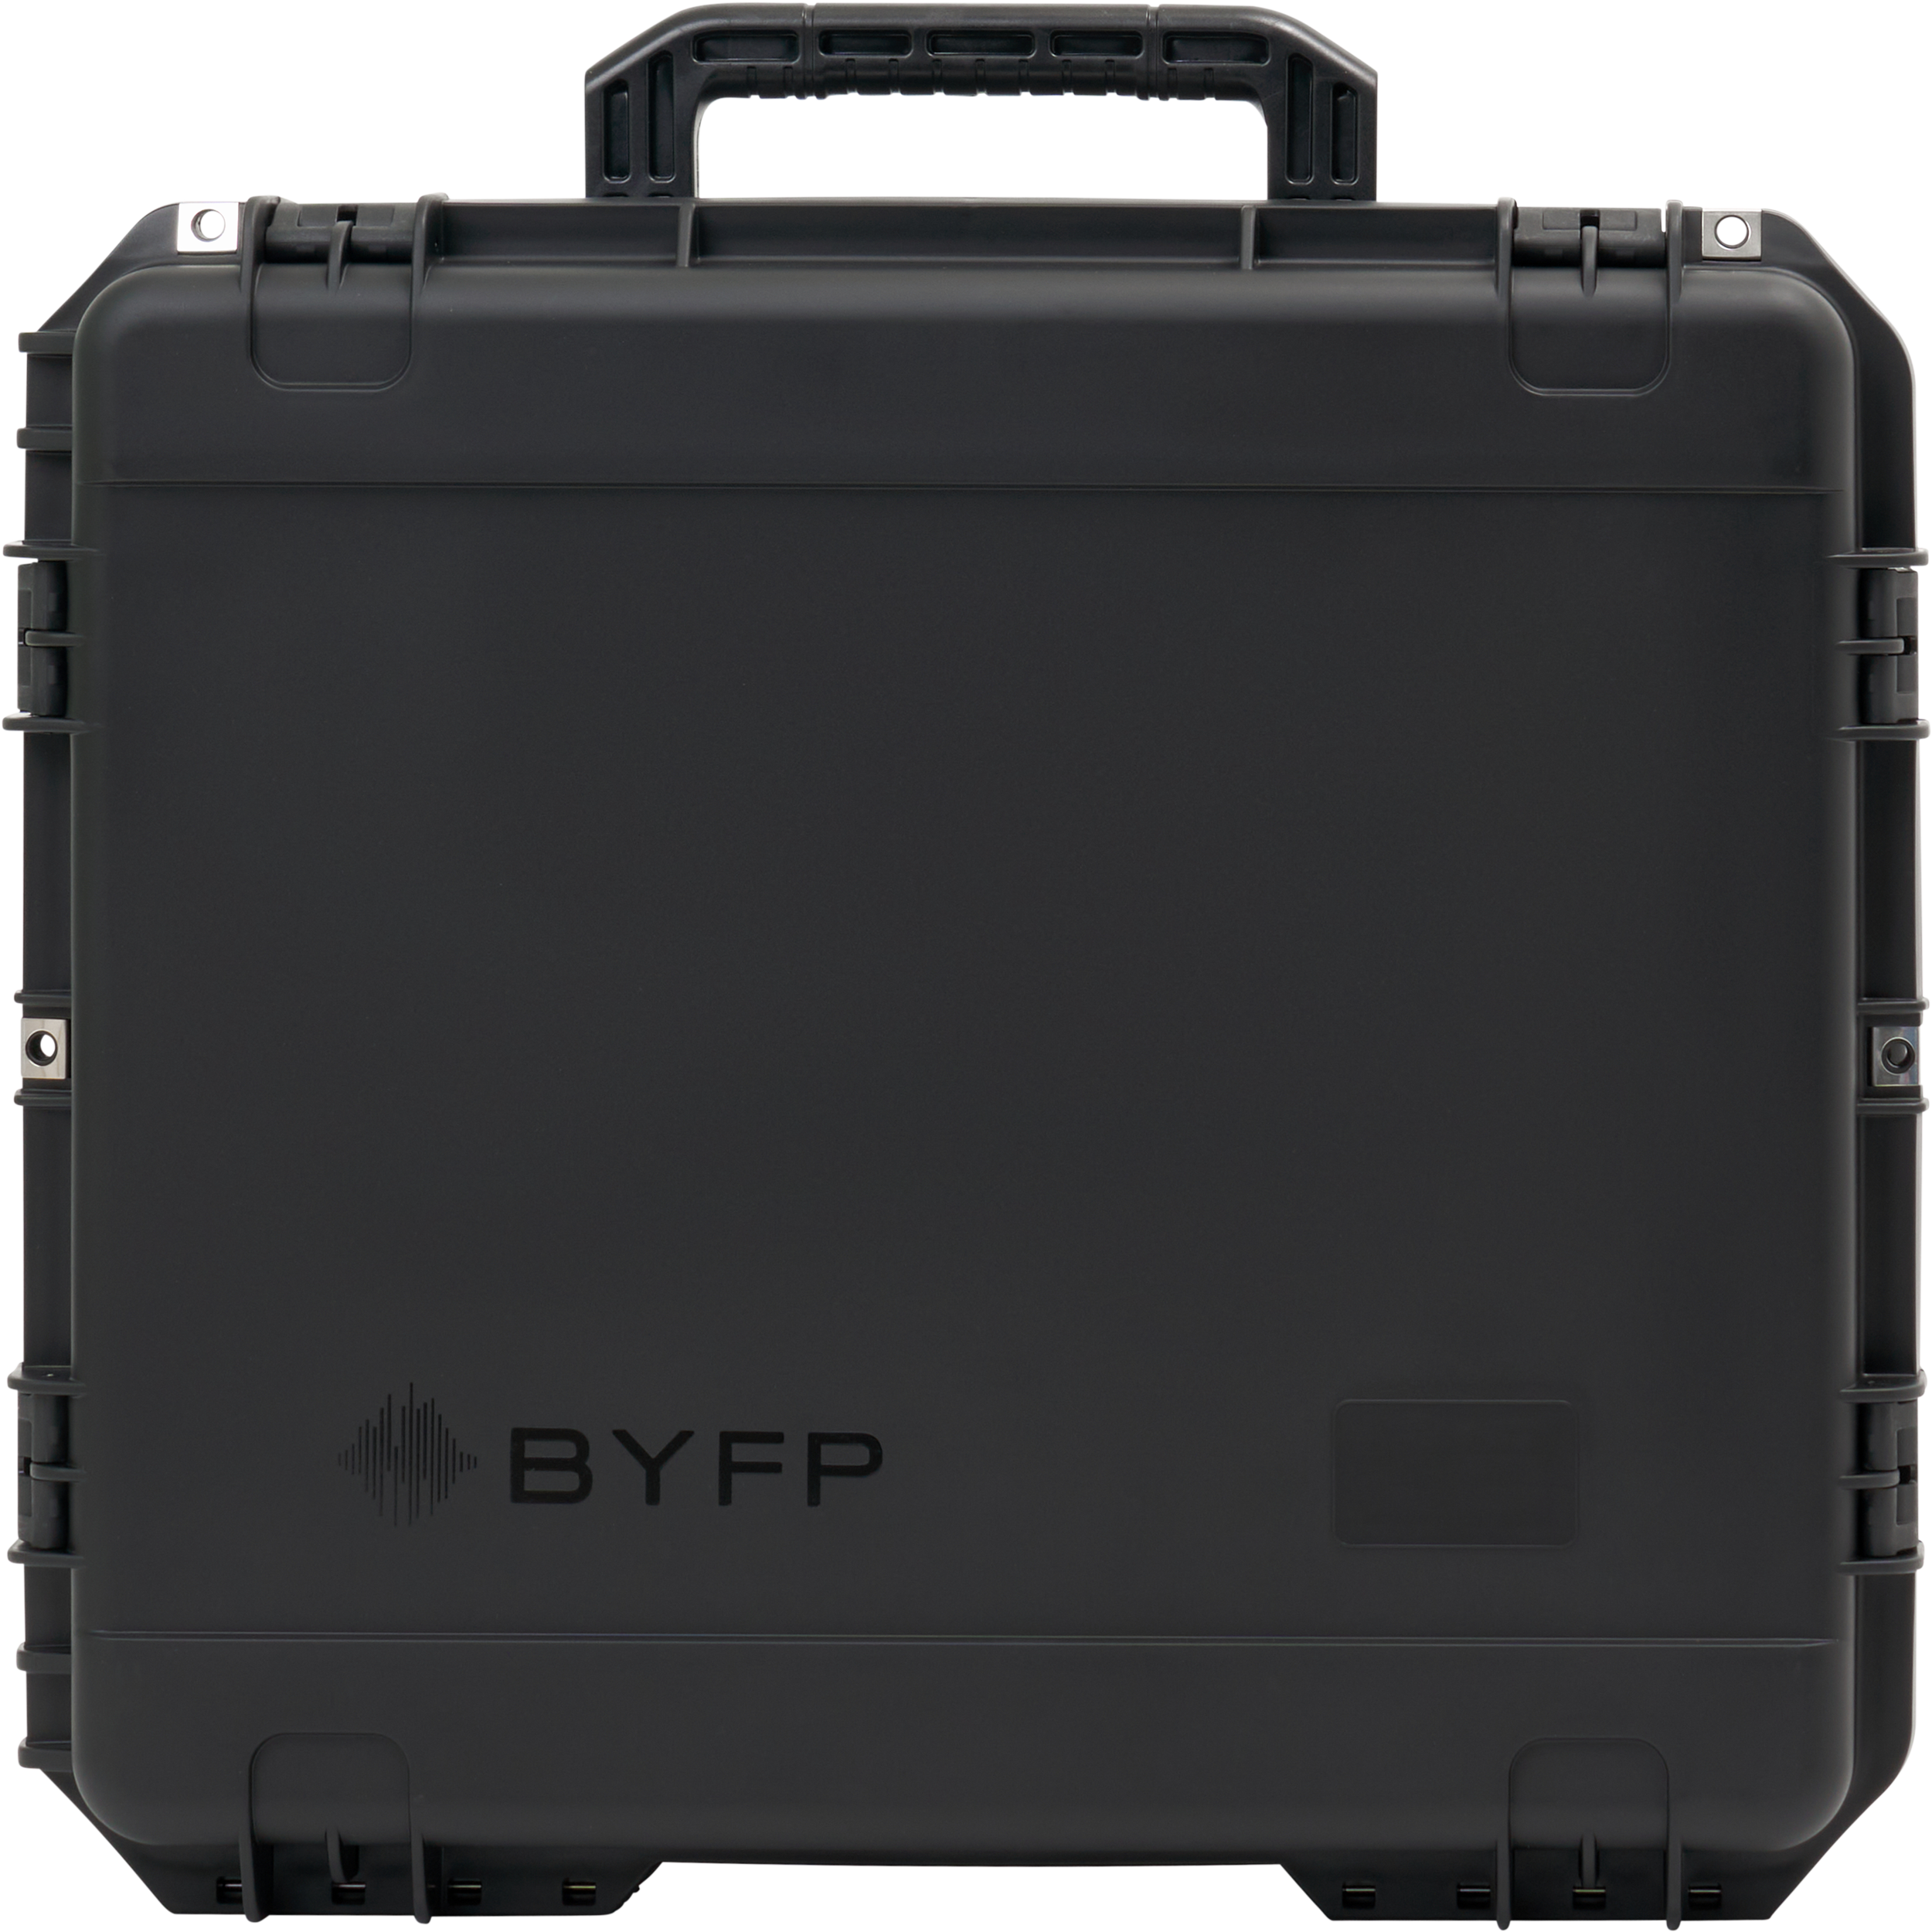 BYFP ipCase for 4x ADJ Uni Pack II Dimmers